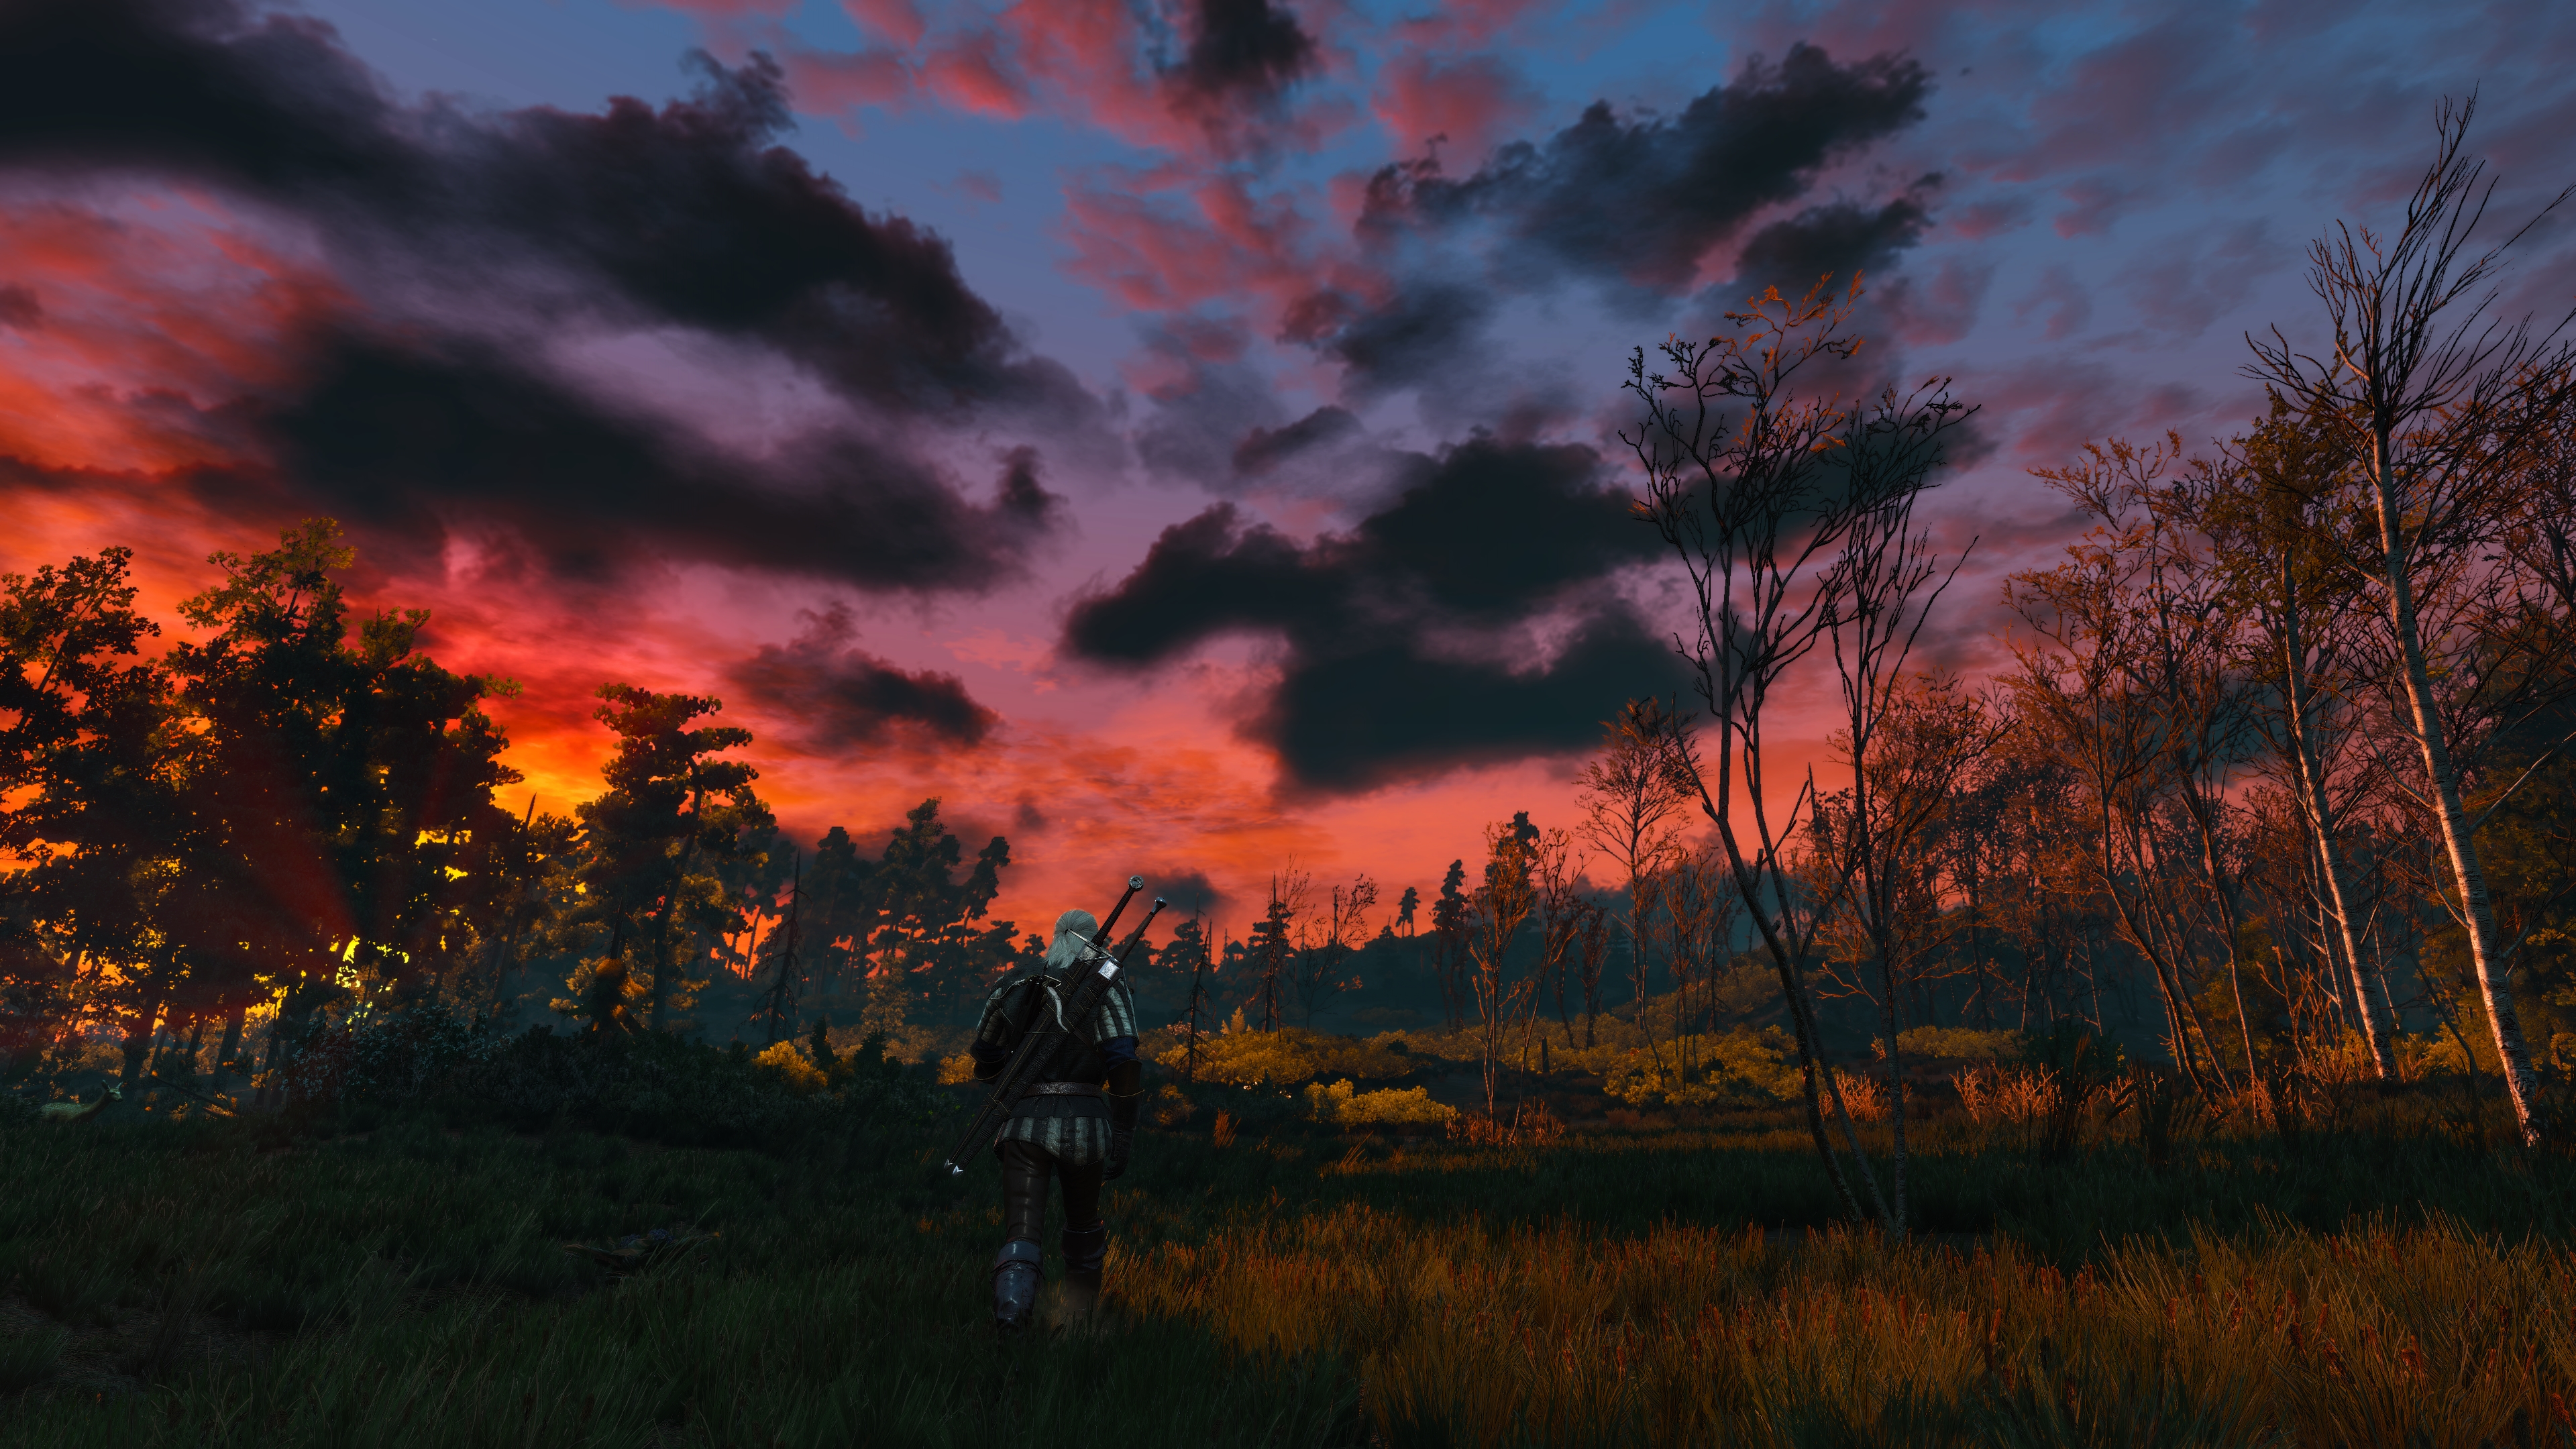 General 3840x2160 The Witcher 3: Wild Hunt screen shot video games